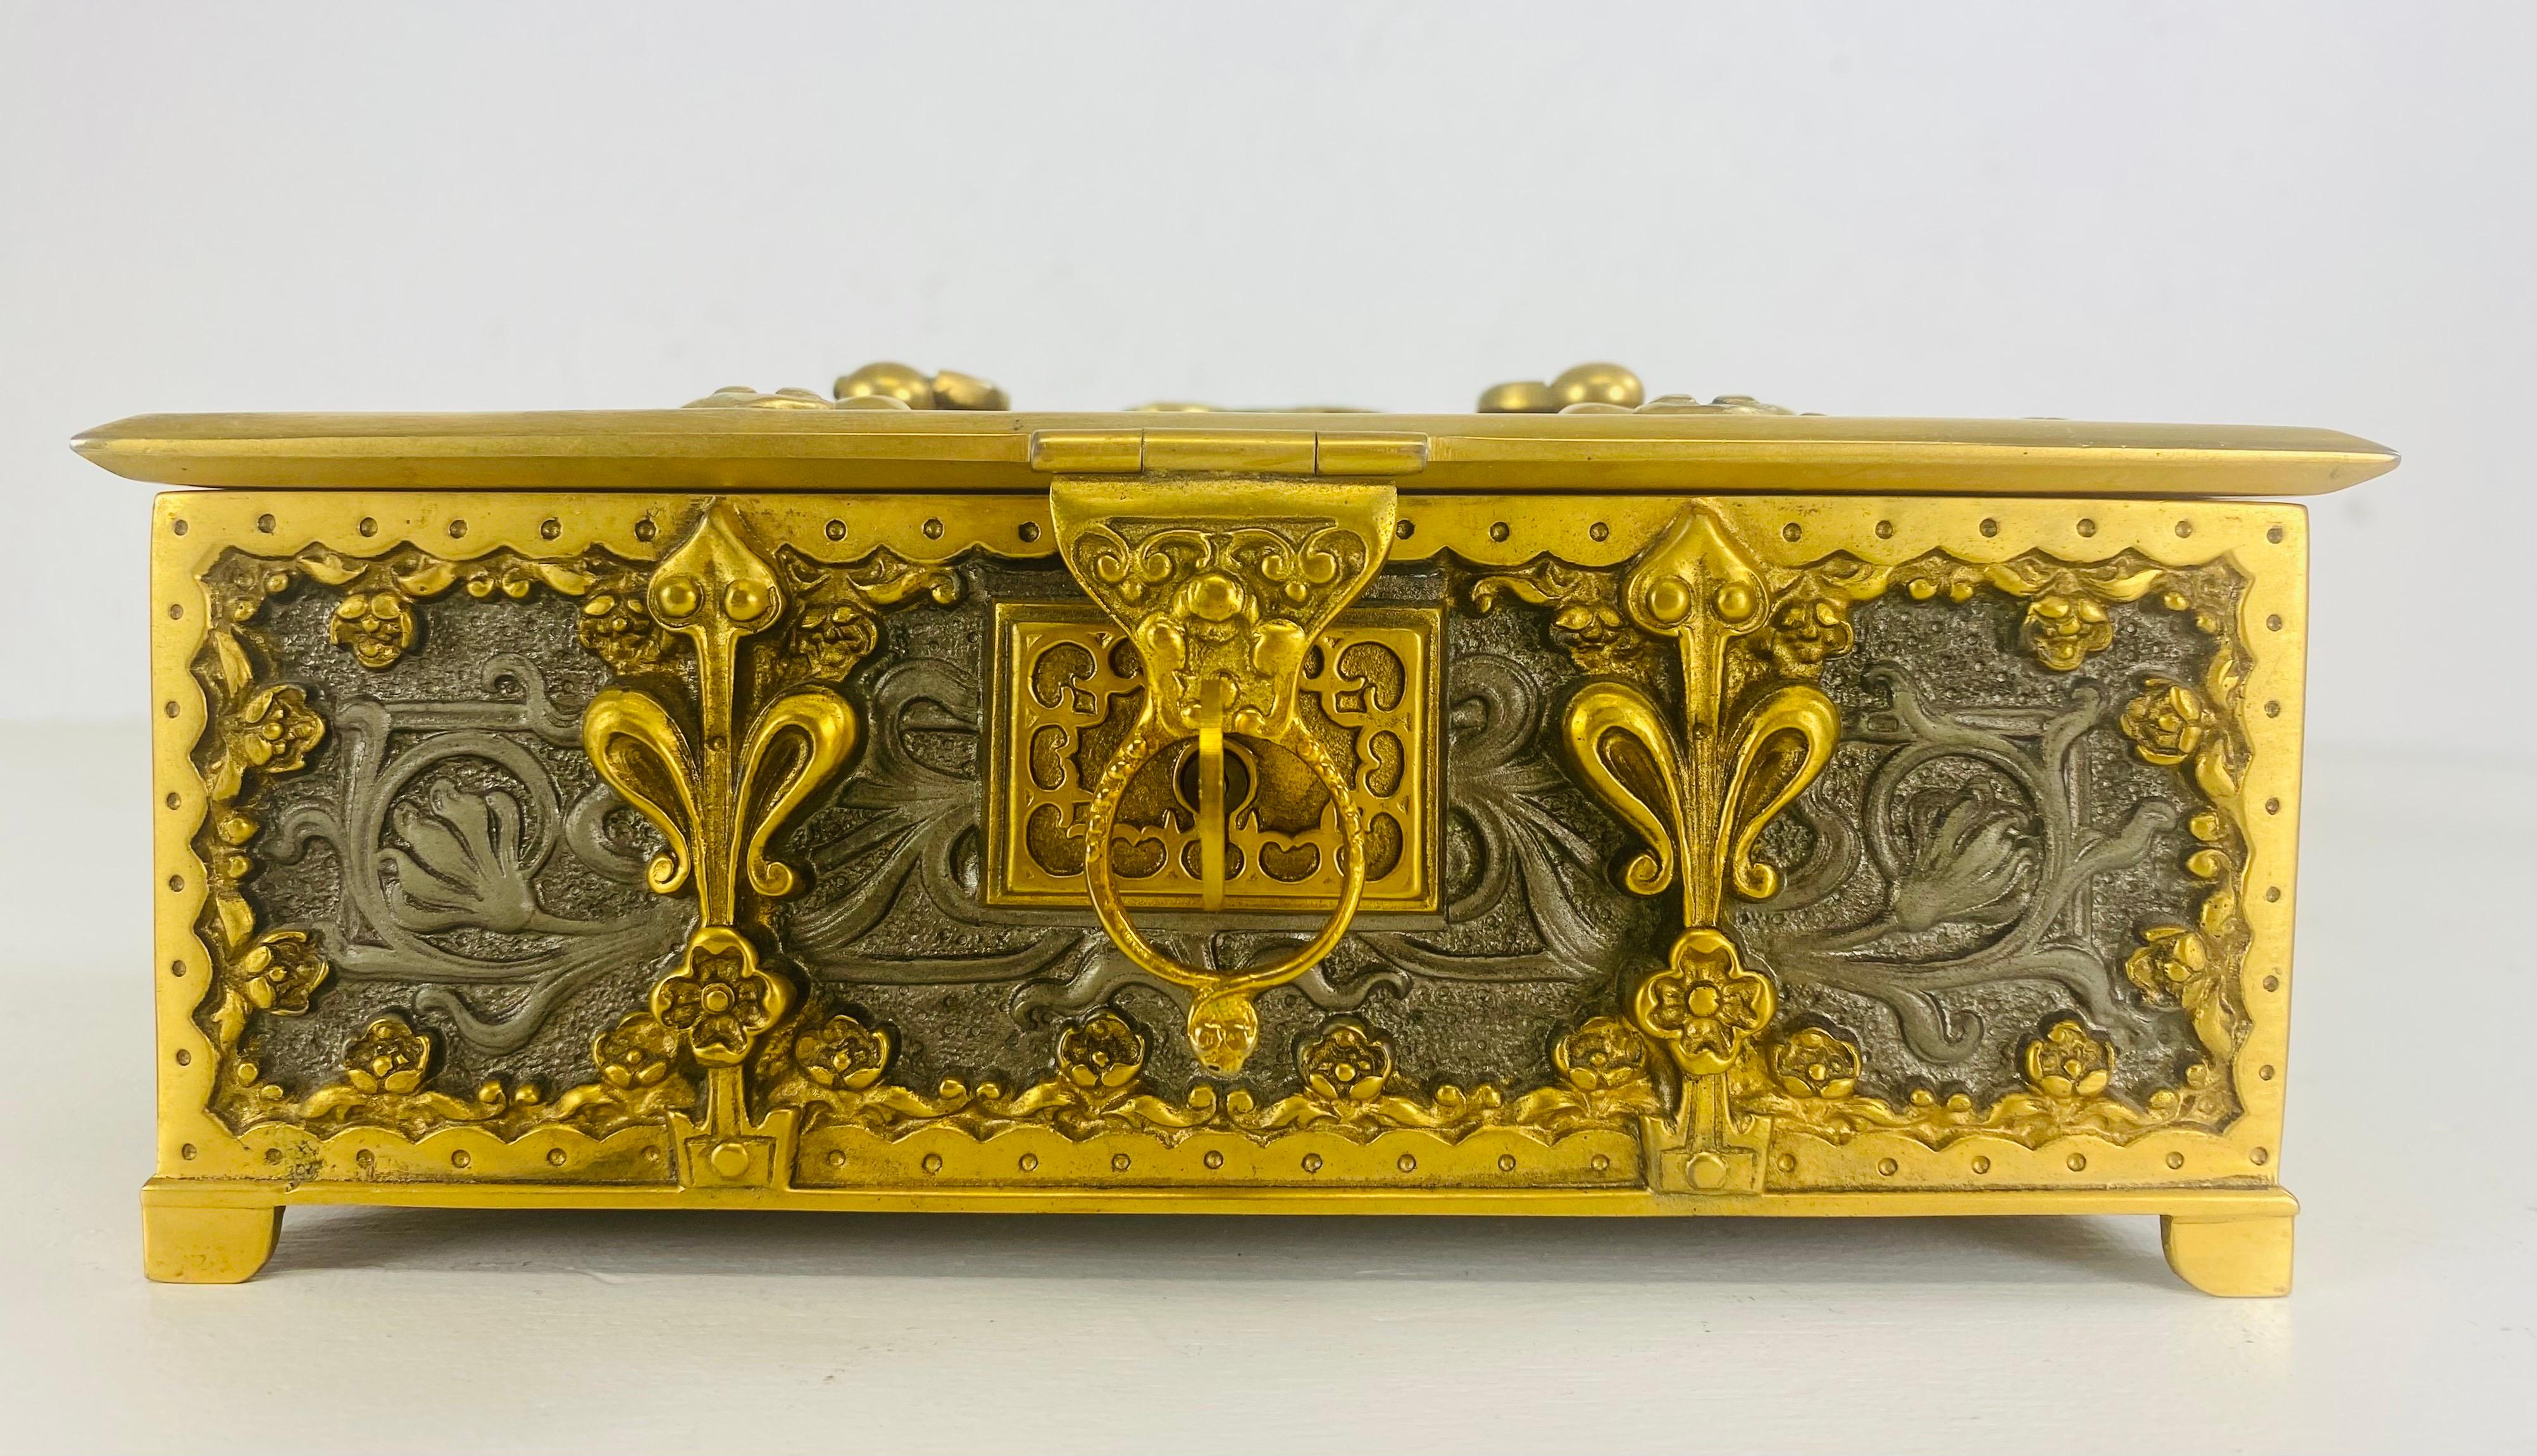 This is a mid 20th century beautifully handcrafted Art Nouveau polished steel and brass trinket box or lock box. This box has beautifully handcrafted polished steel art Nouveau flowers and vines surrounded by a brass edge. The box features its